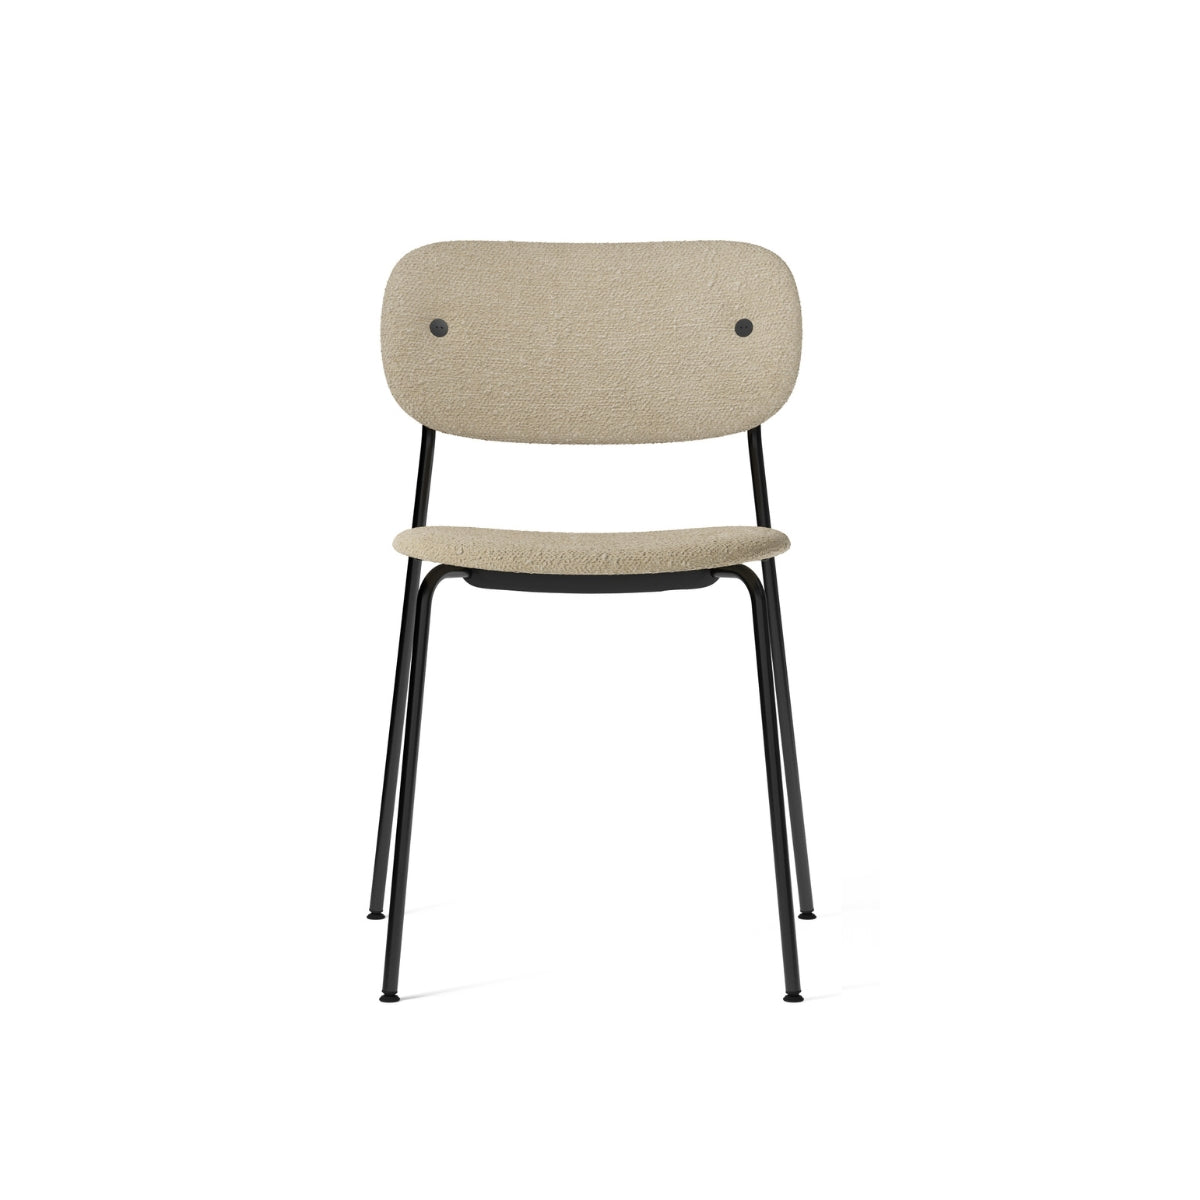 Audo Copenhagen | Co Dining Chair – Black Steel, Upholstered Seat and Back